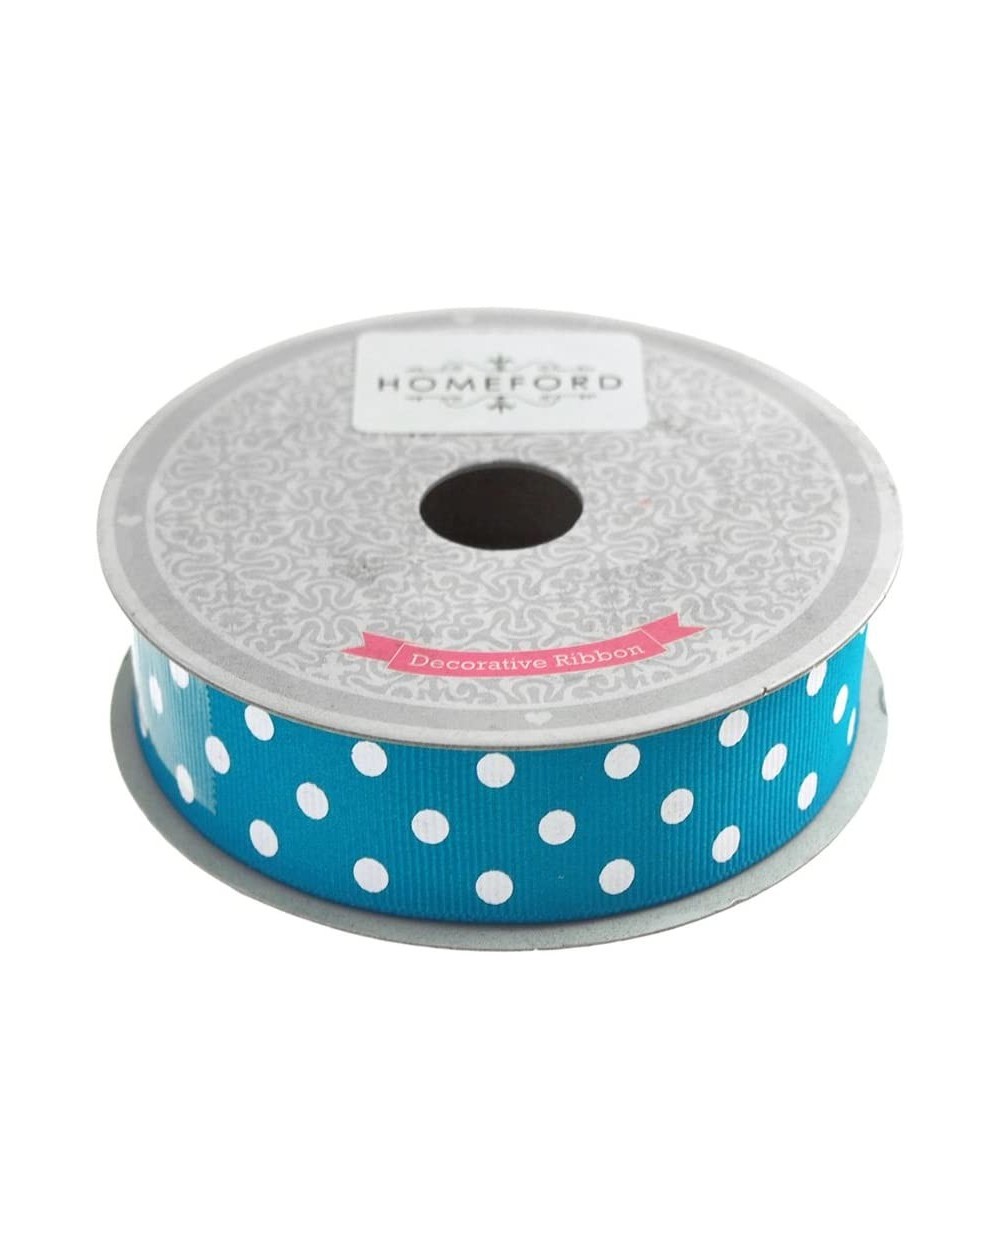 Bows & Ribbons Polka Dot Grosgrain Ribbon- 7/8-Inch- 10 Yards (Turquoise) - Turquoise - C4185Z9GH8N $7.78